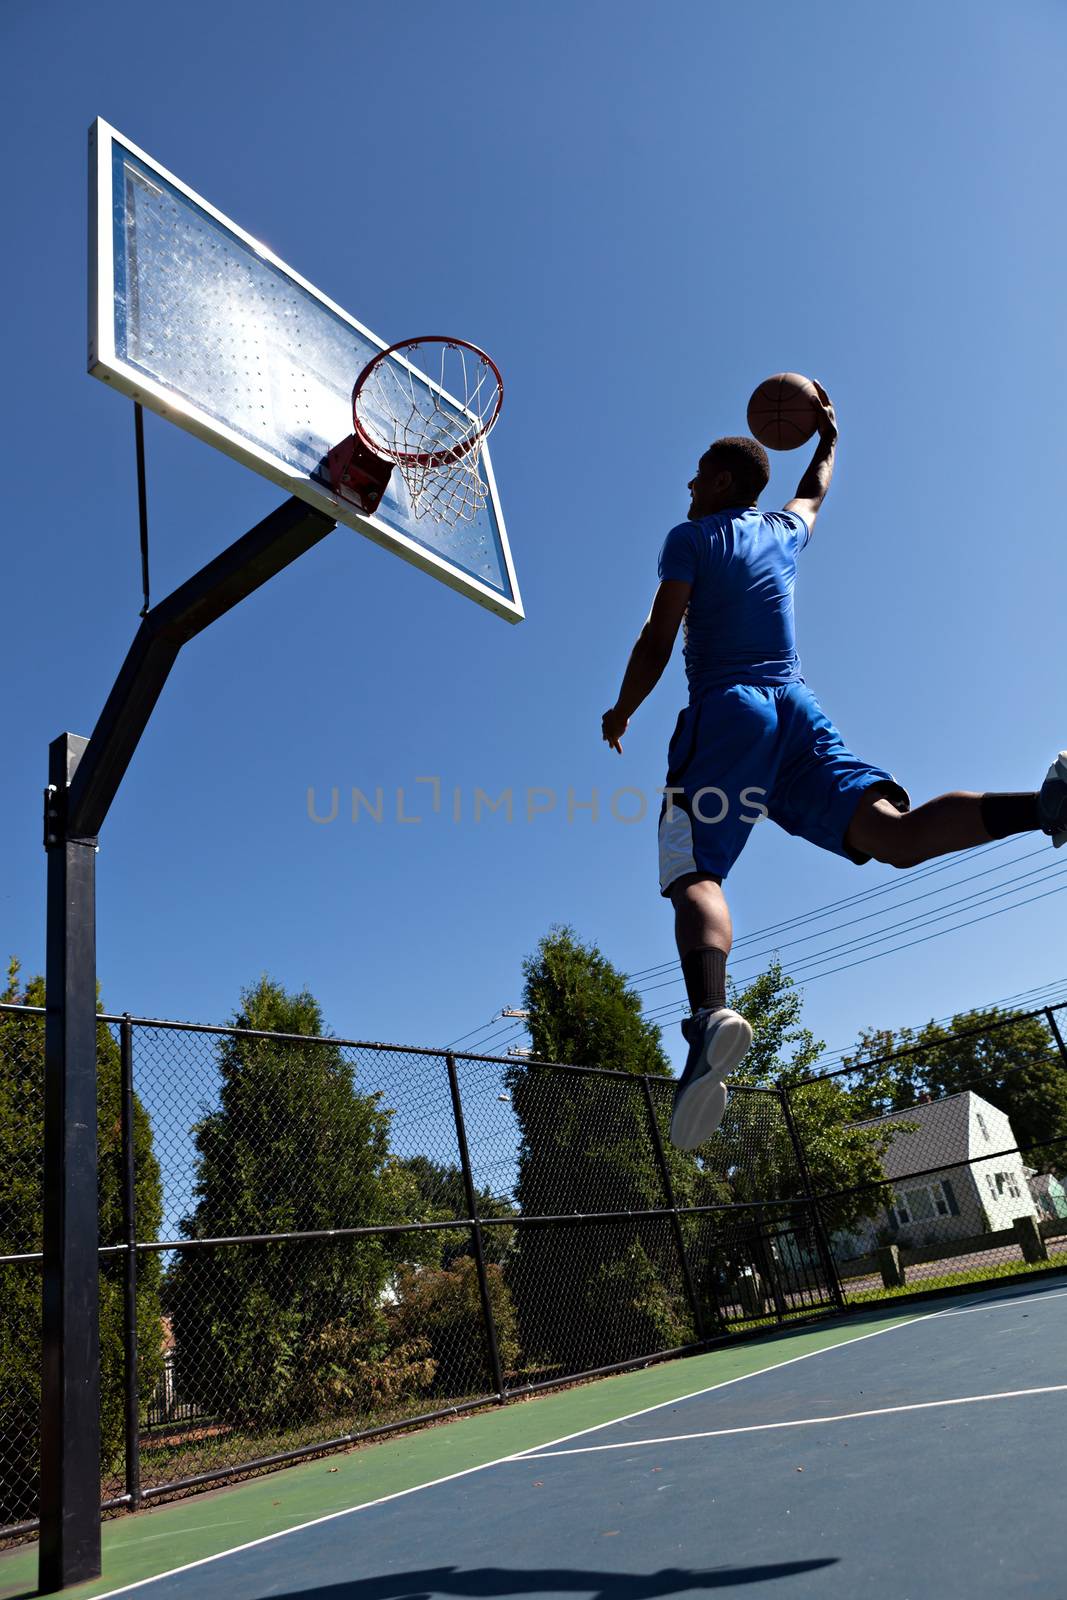 Man Dunking the Basketball by graficallyminded